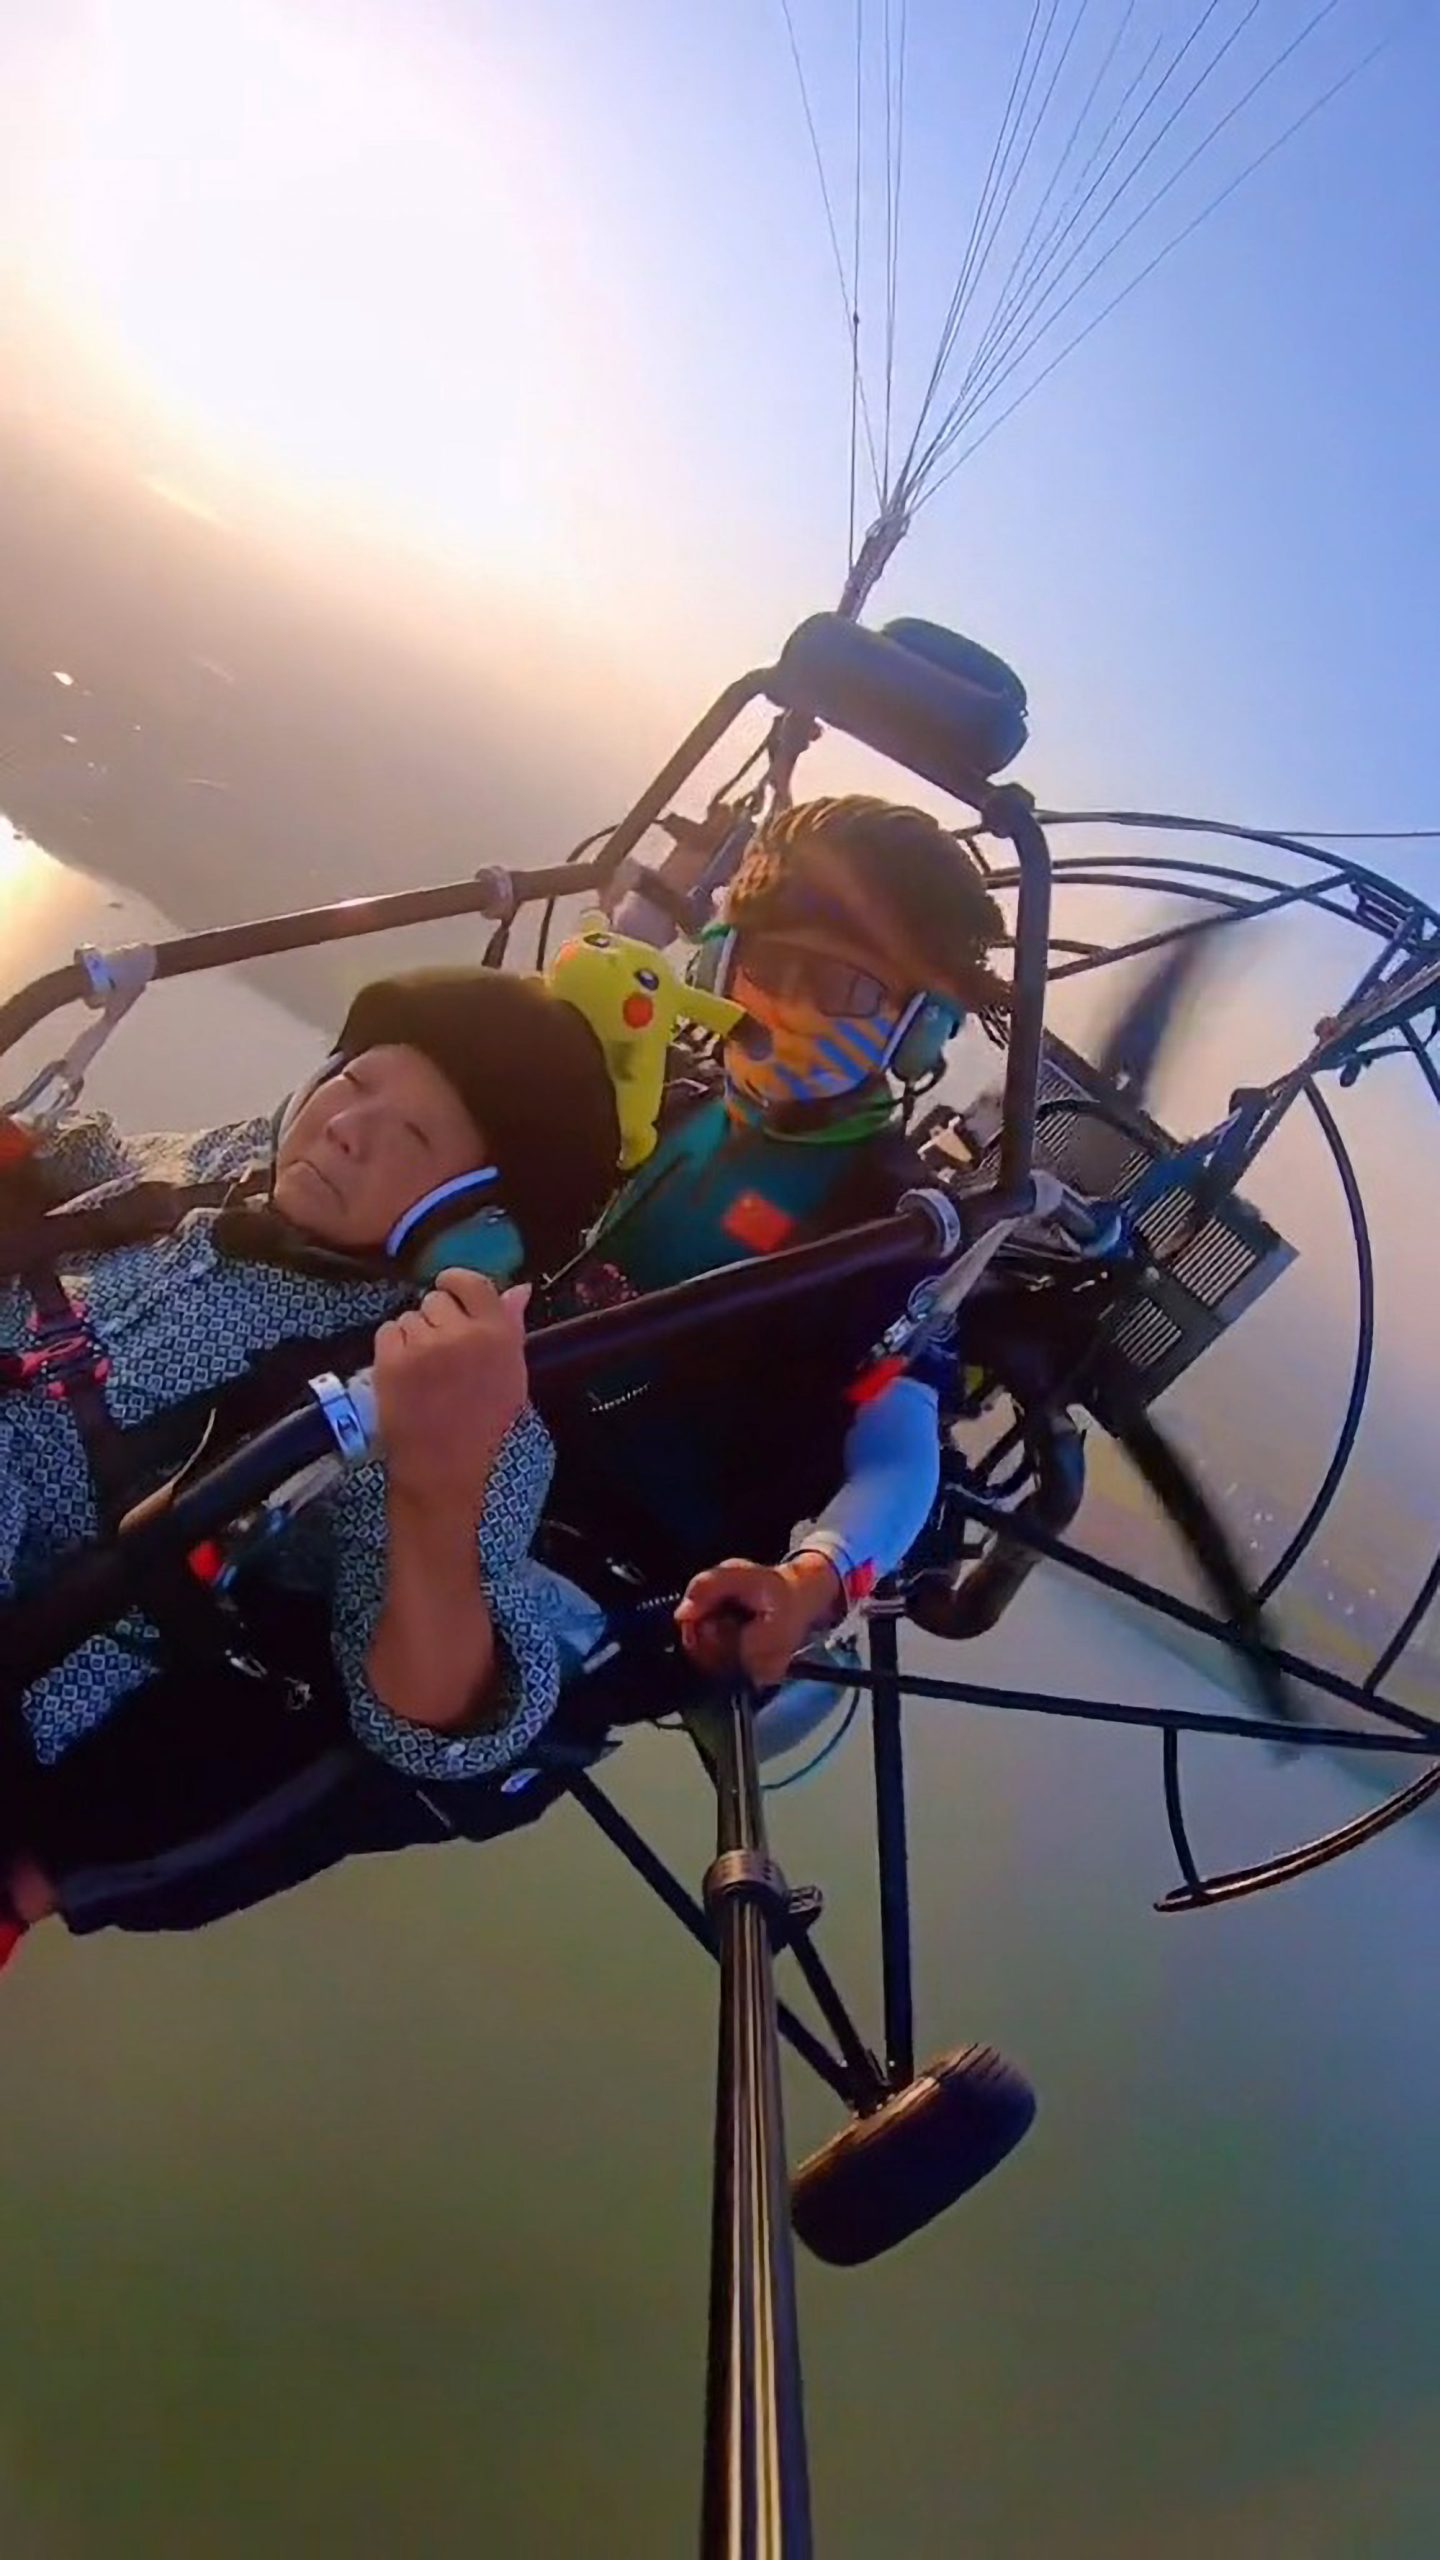 Read more about the article Touching Moment Grandmother, 83, Goes Paragliding Wearing Pikachu Hat